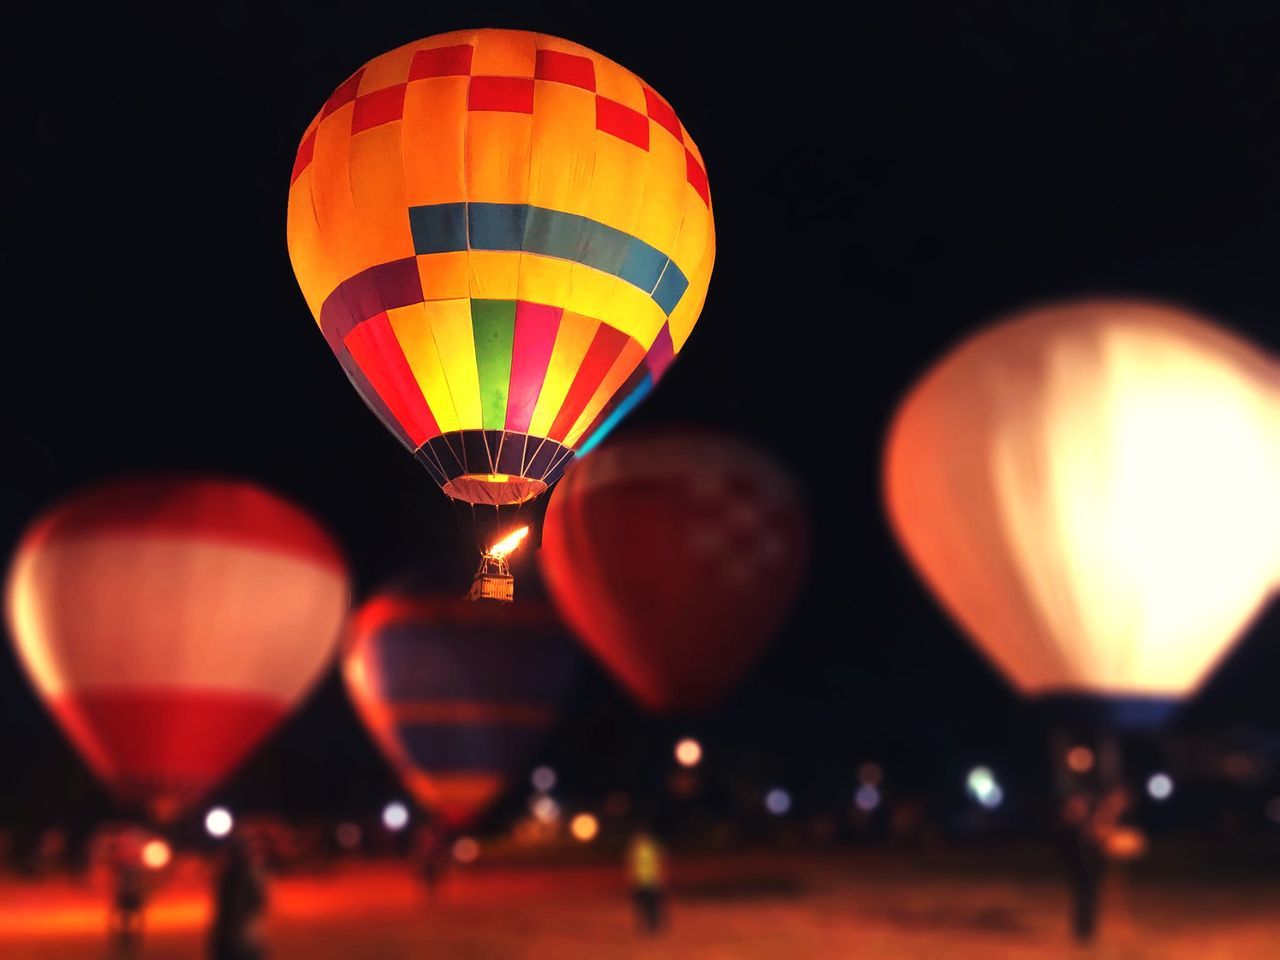 hot air balloon, illuminated, air vehicle, multi colored, no people, night, balloon, celebration, transportation, glowing, orange color, fire, lighting equipment, flying, ballooning festival, focus on foreground, nature, burning, outdoors, glass